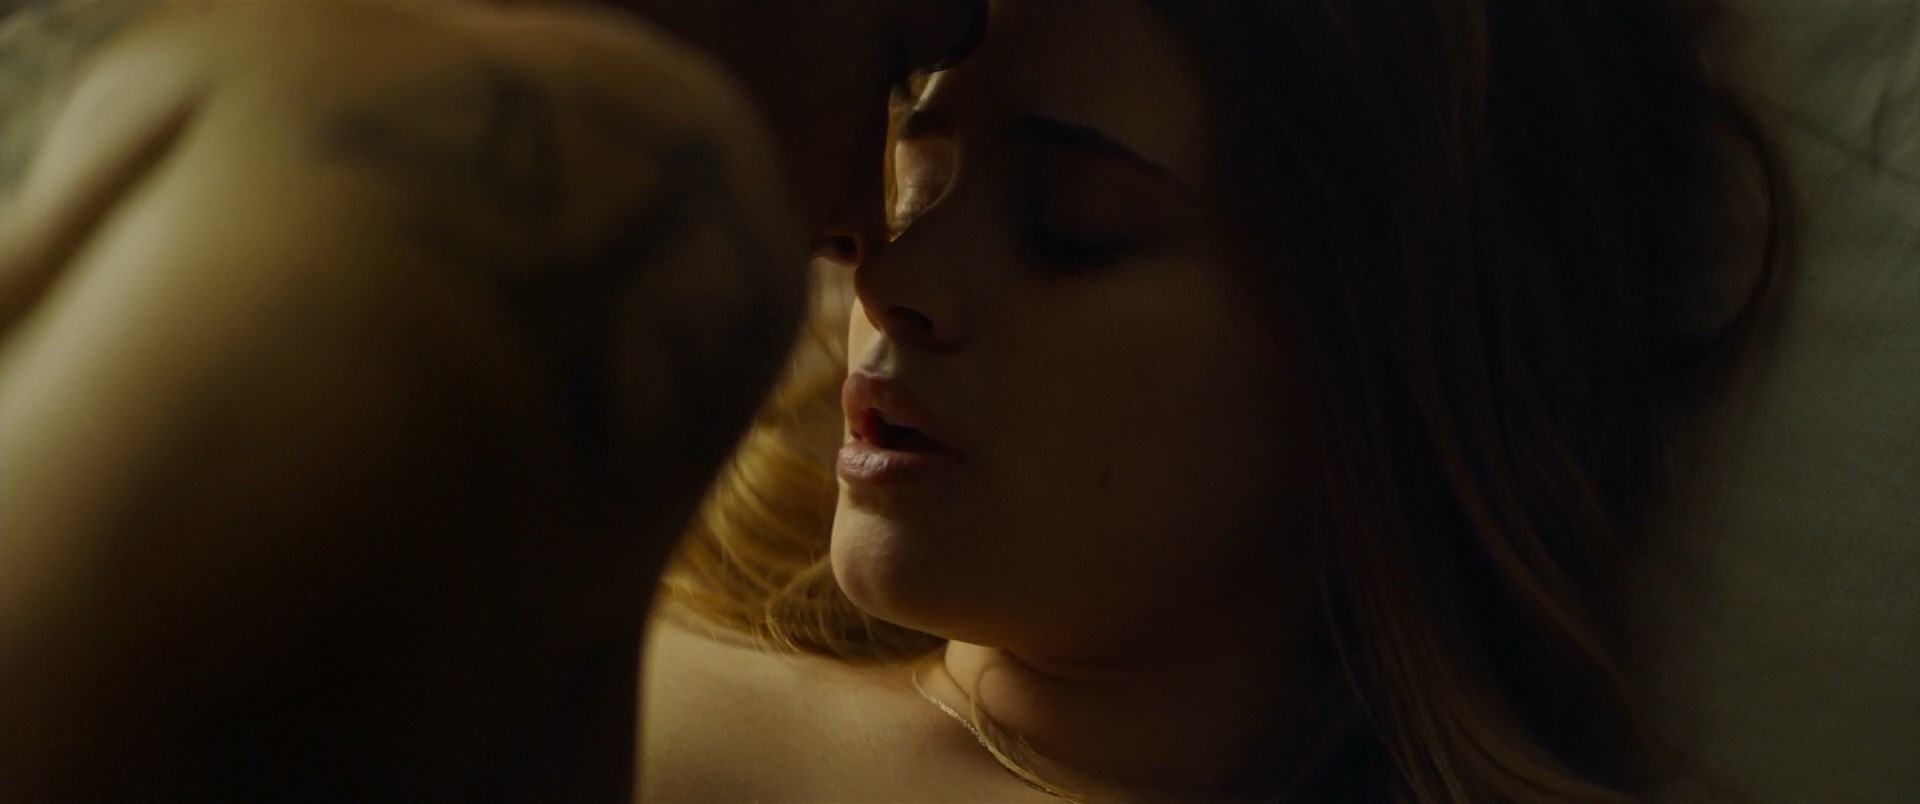 Josephine Langford has a sexy moment in the movie “After” which was release...